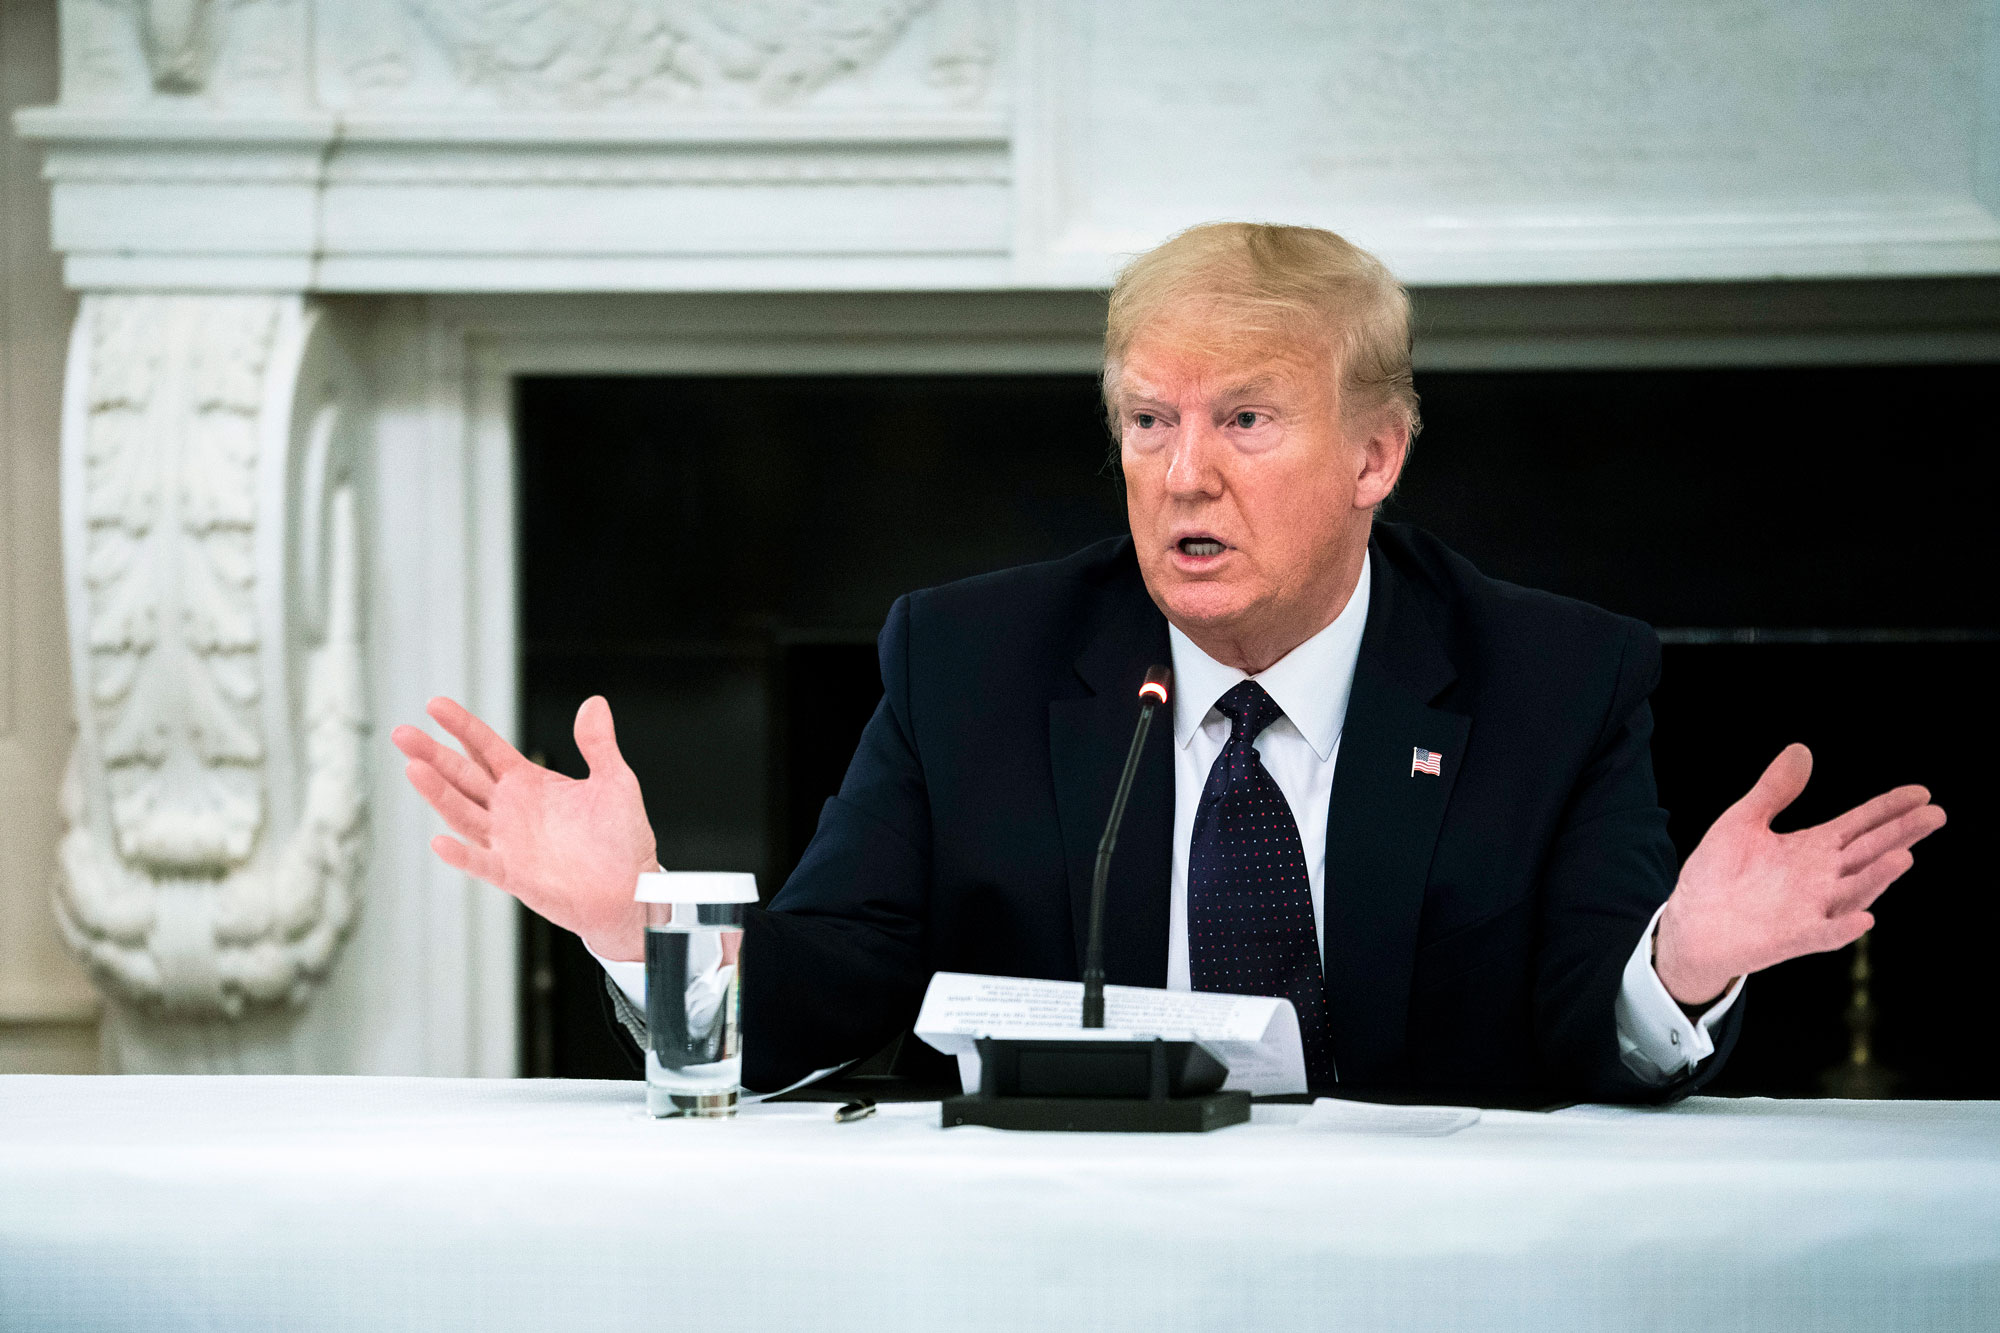 U.S. President Donald Trump speaks during a roundtable in the State Dining Room of the White House on May 18 in Washington.